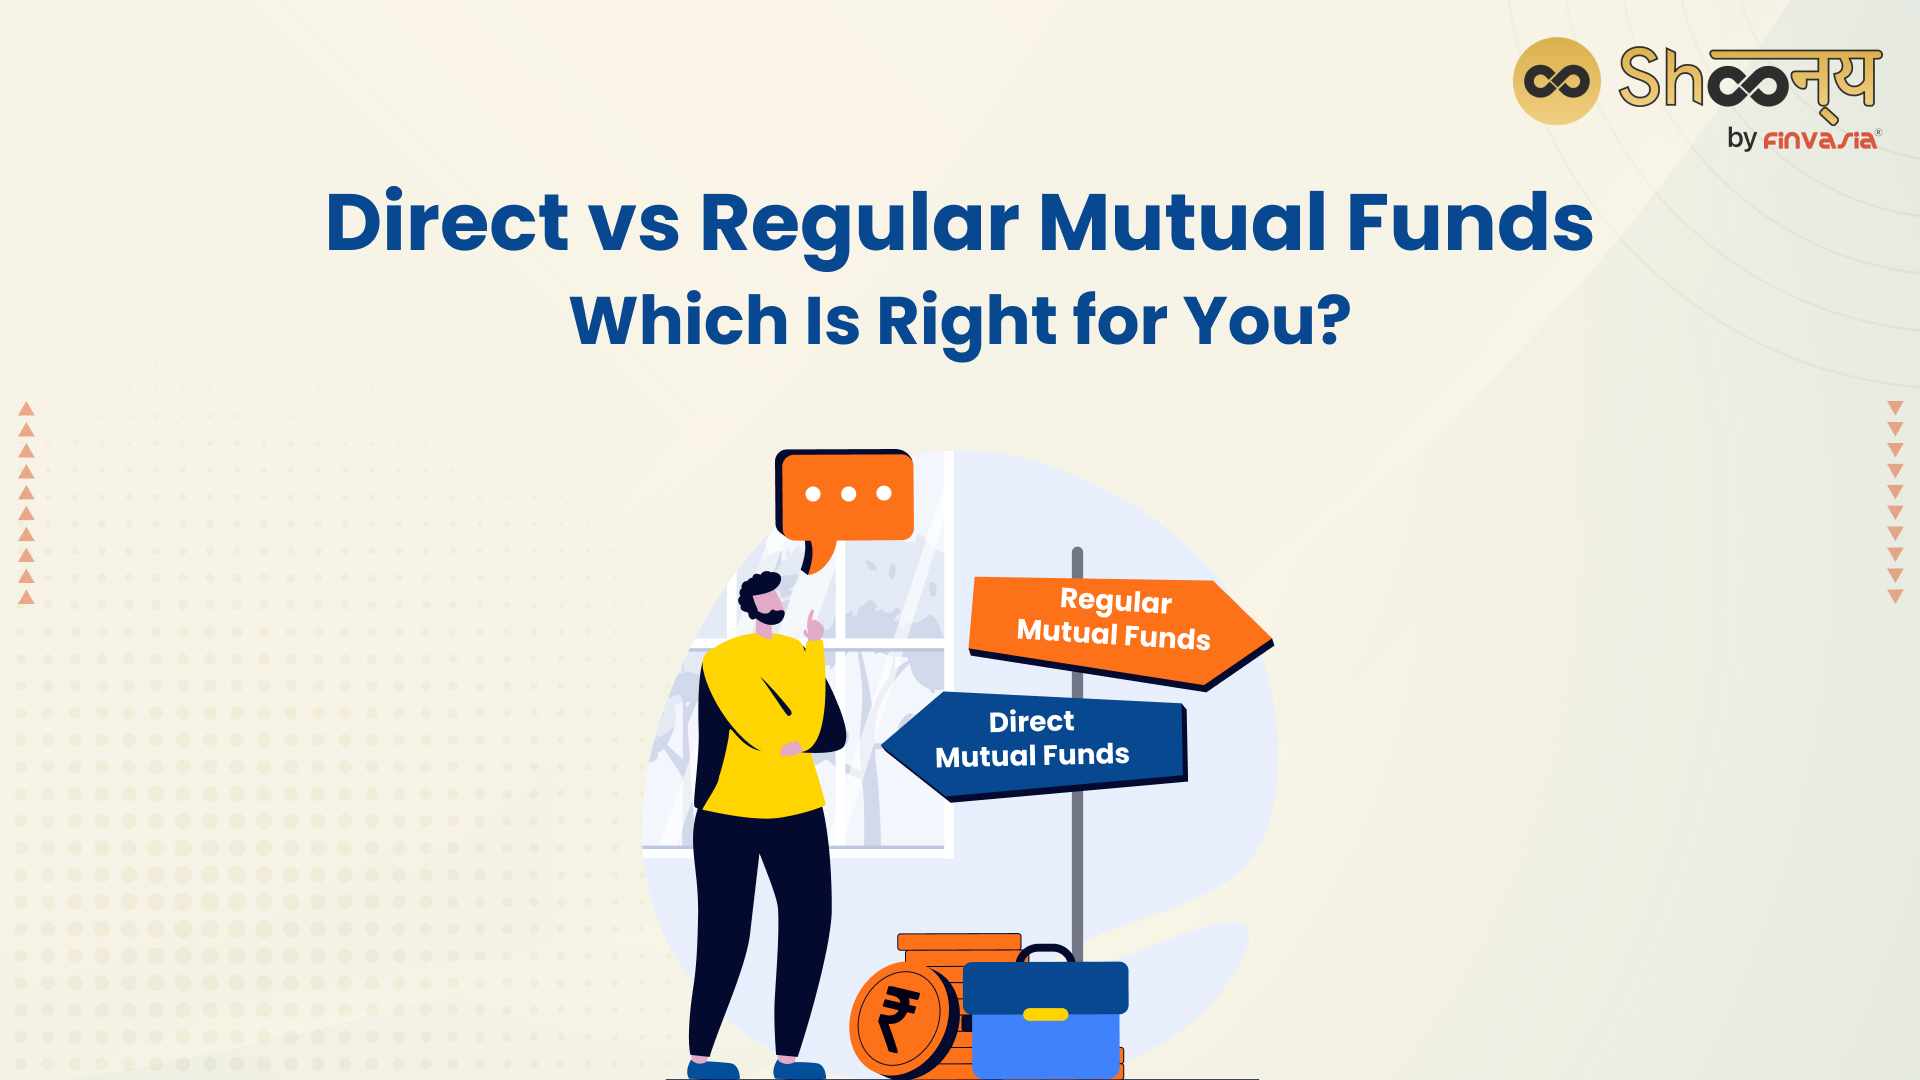 Direct vs Regular Mutual Funds: Which to Choose?